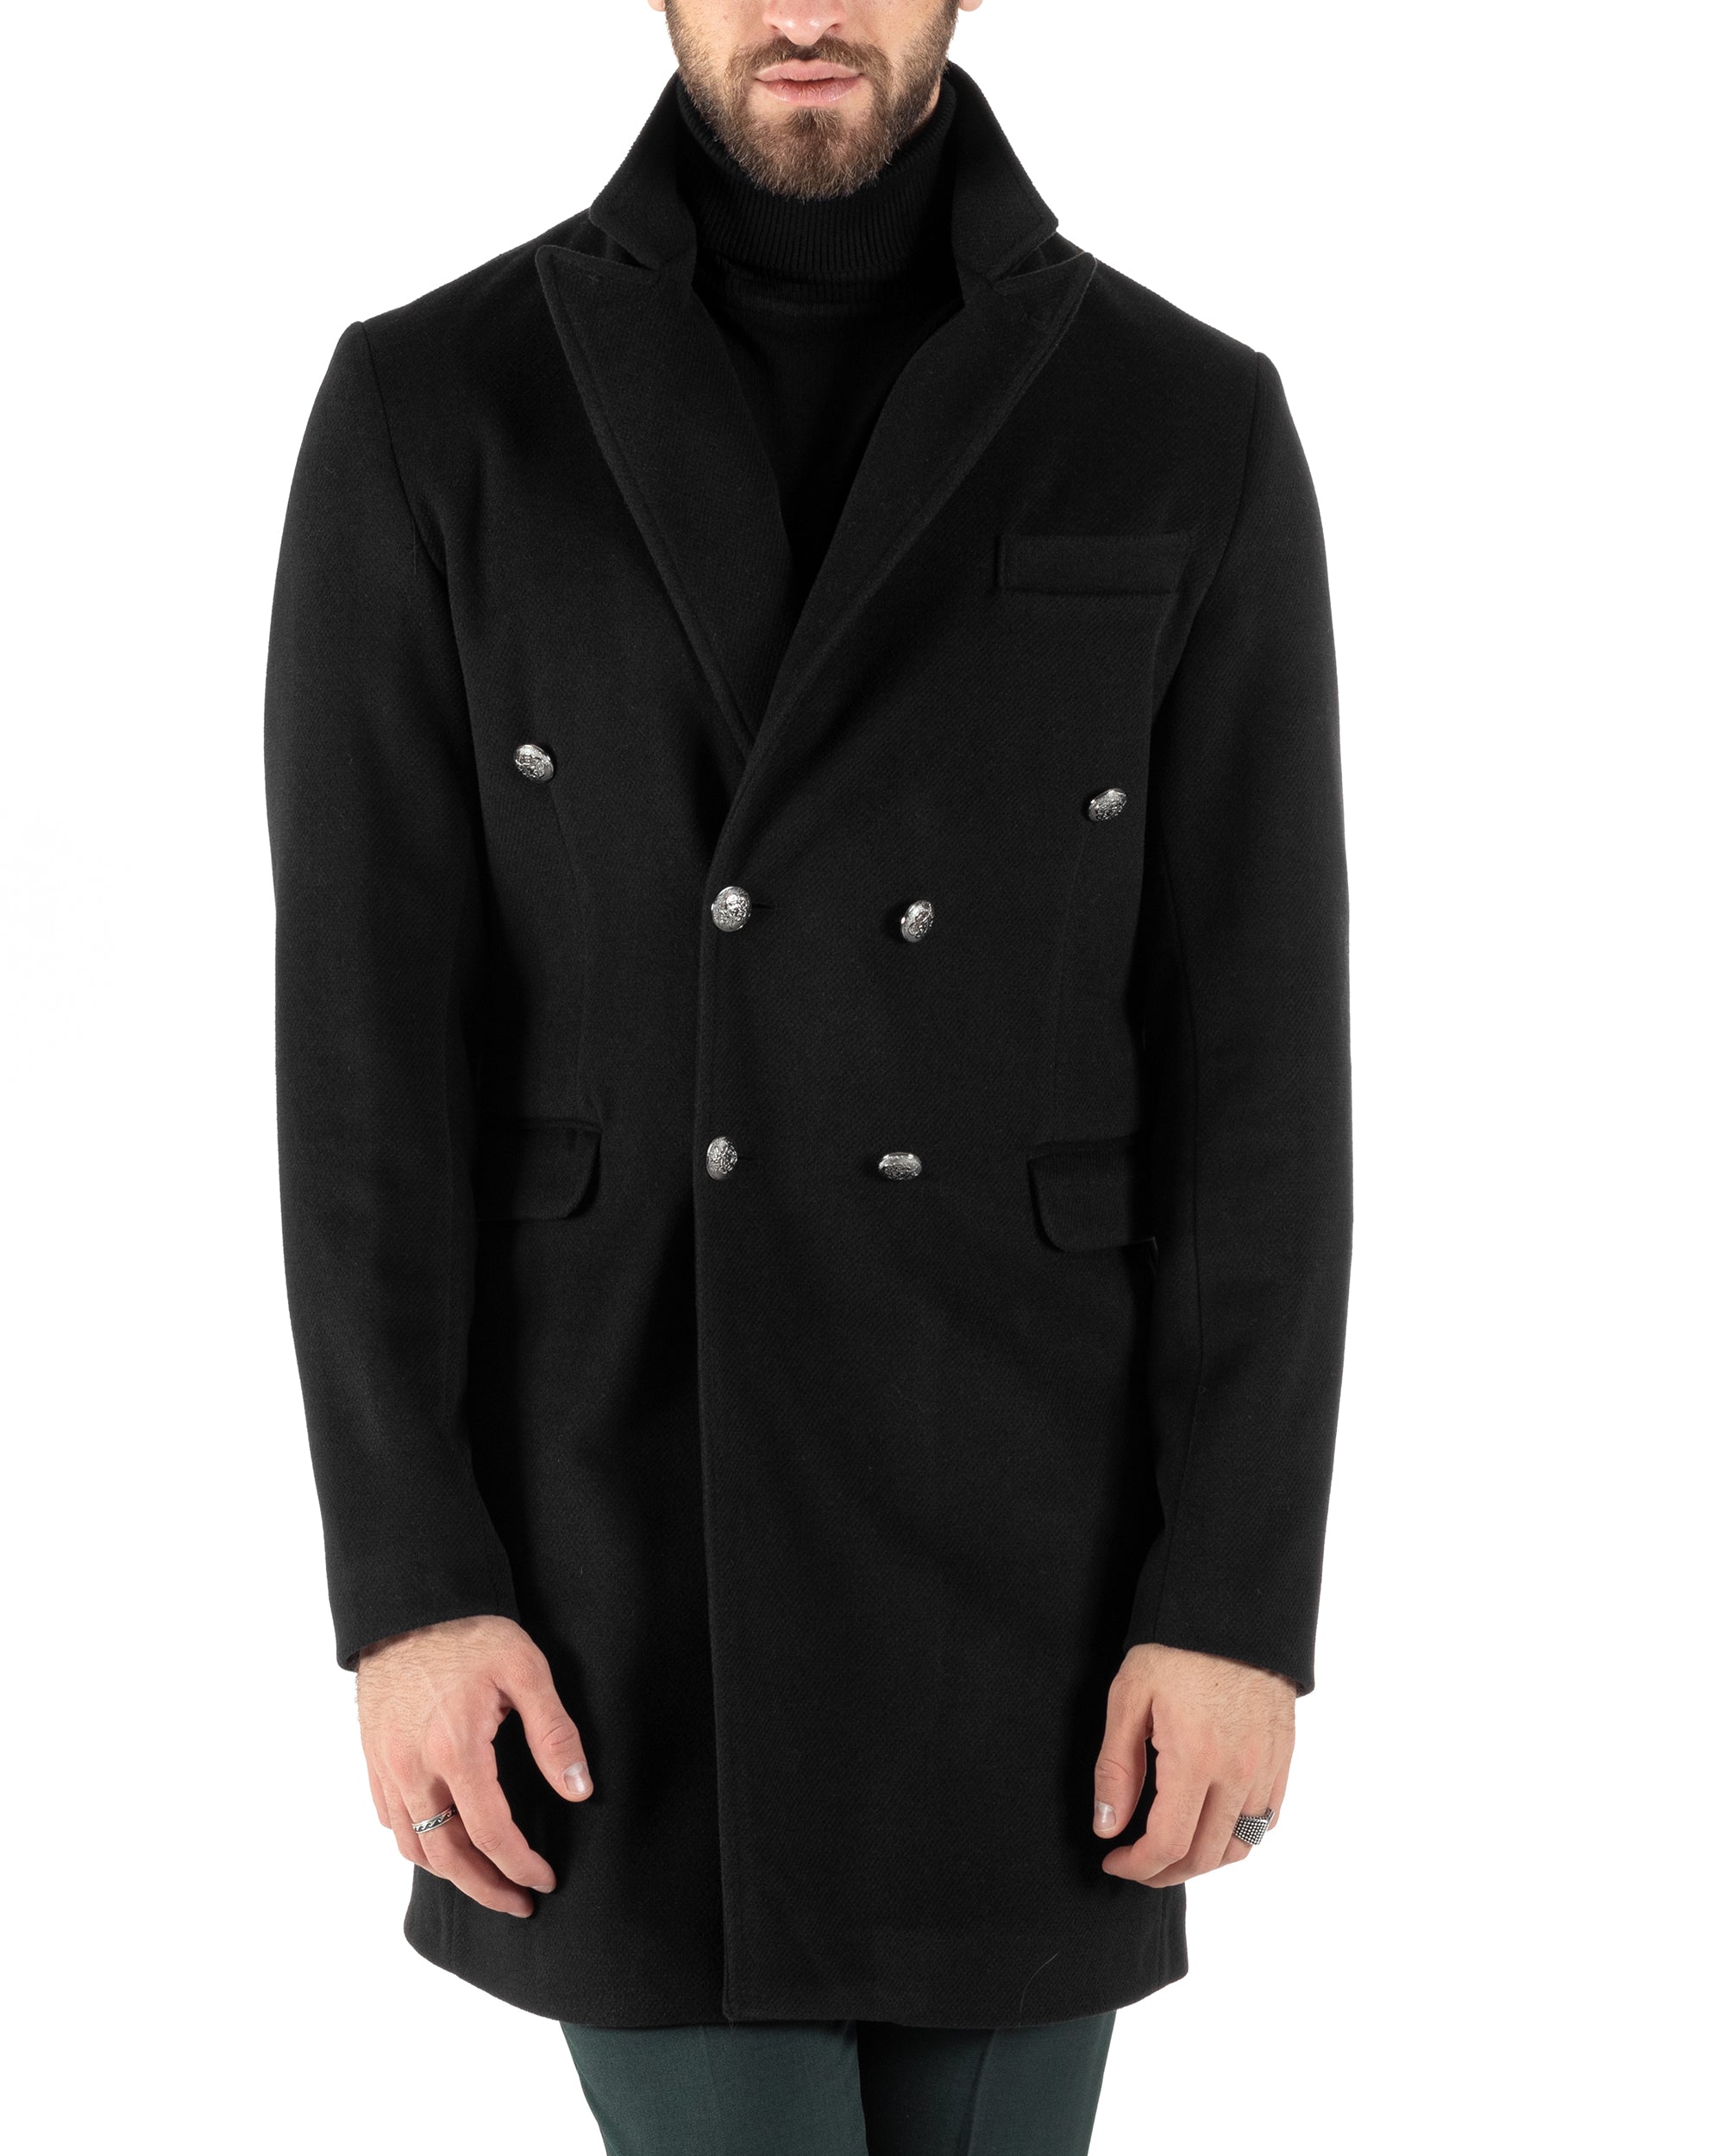 Double-breasted Coat Men's Jacket With Elegant Black Collar GIOSAL-G2756A